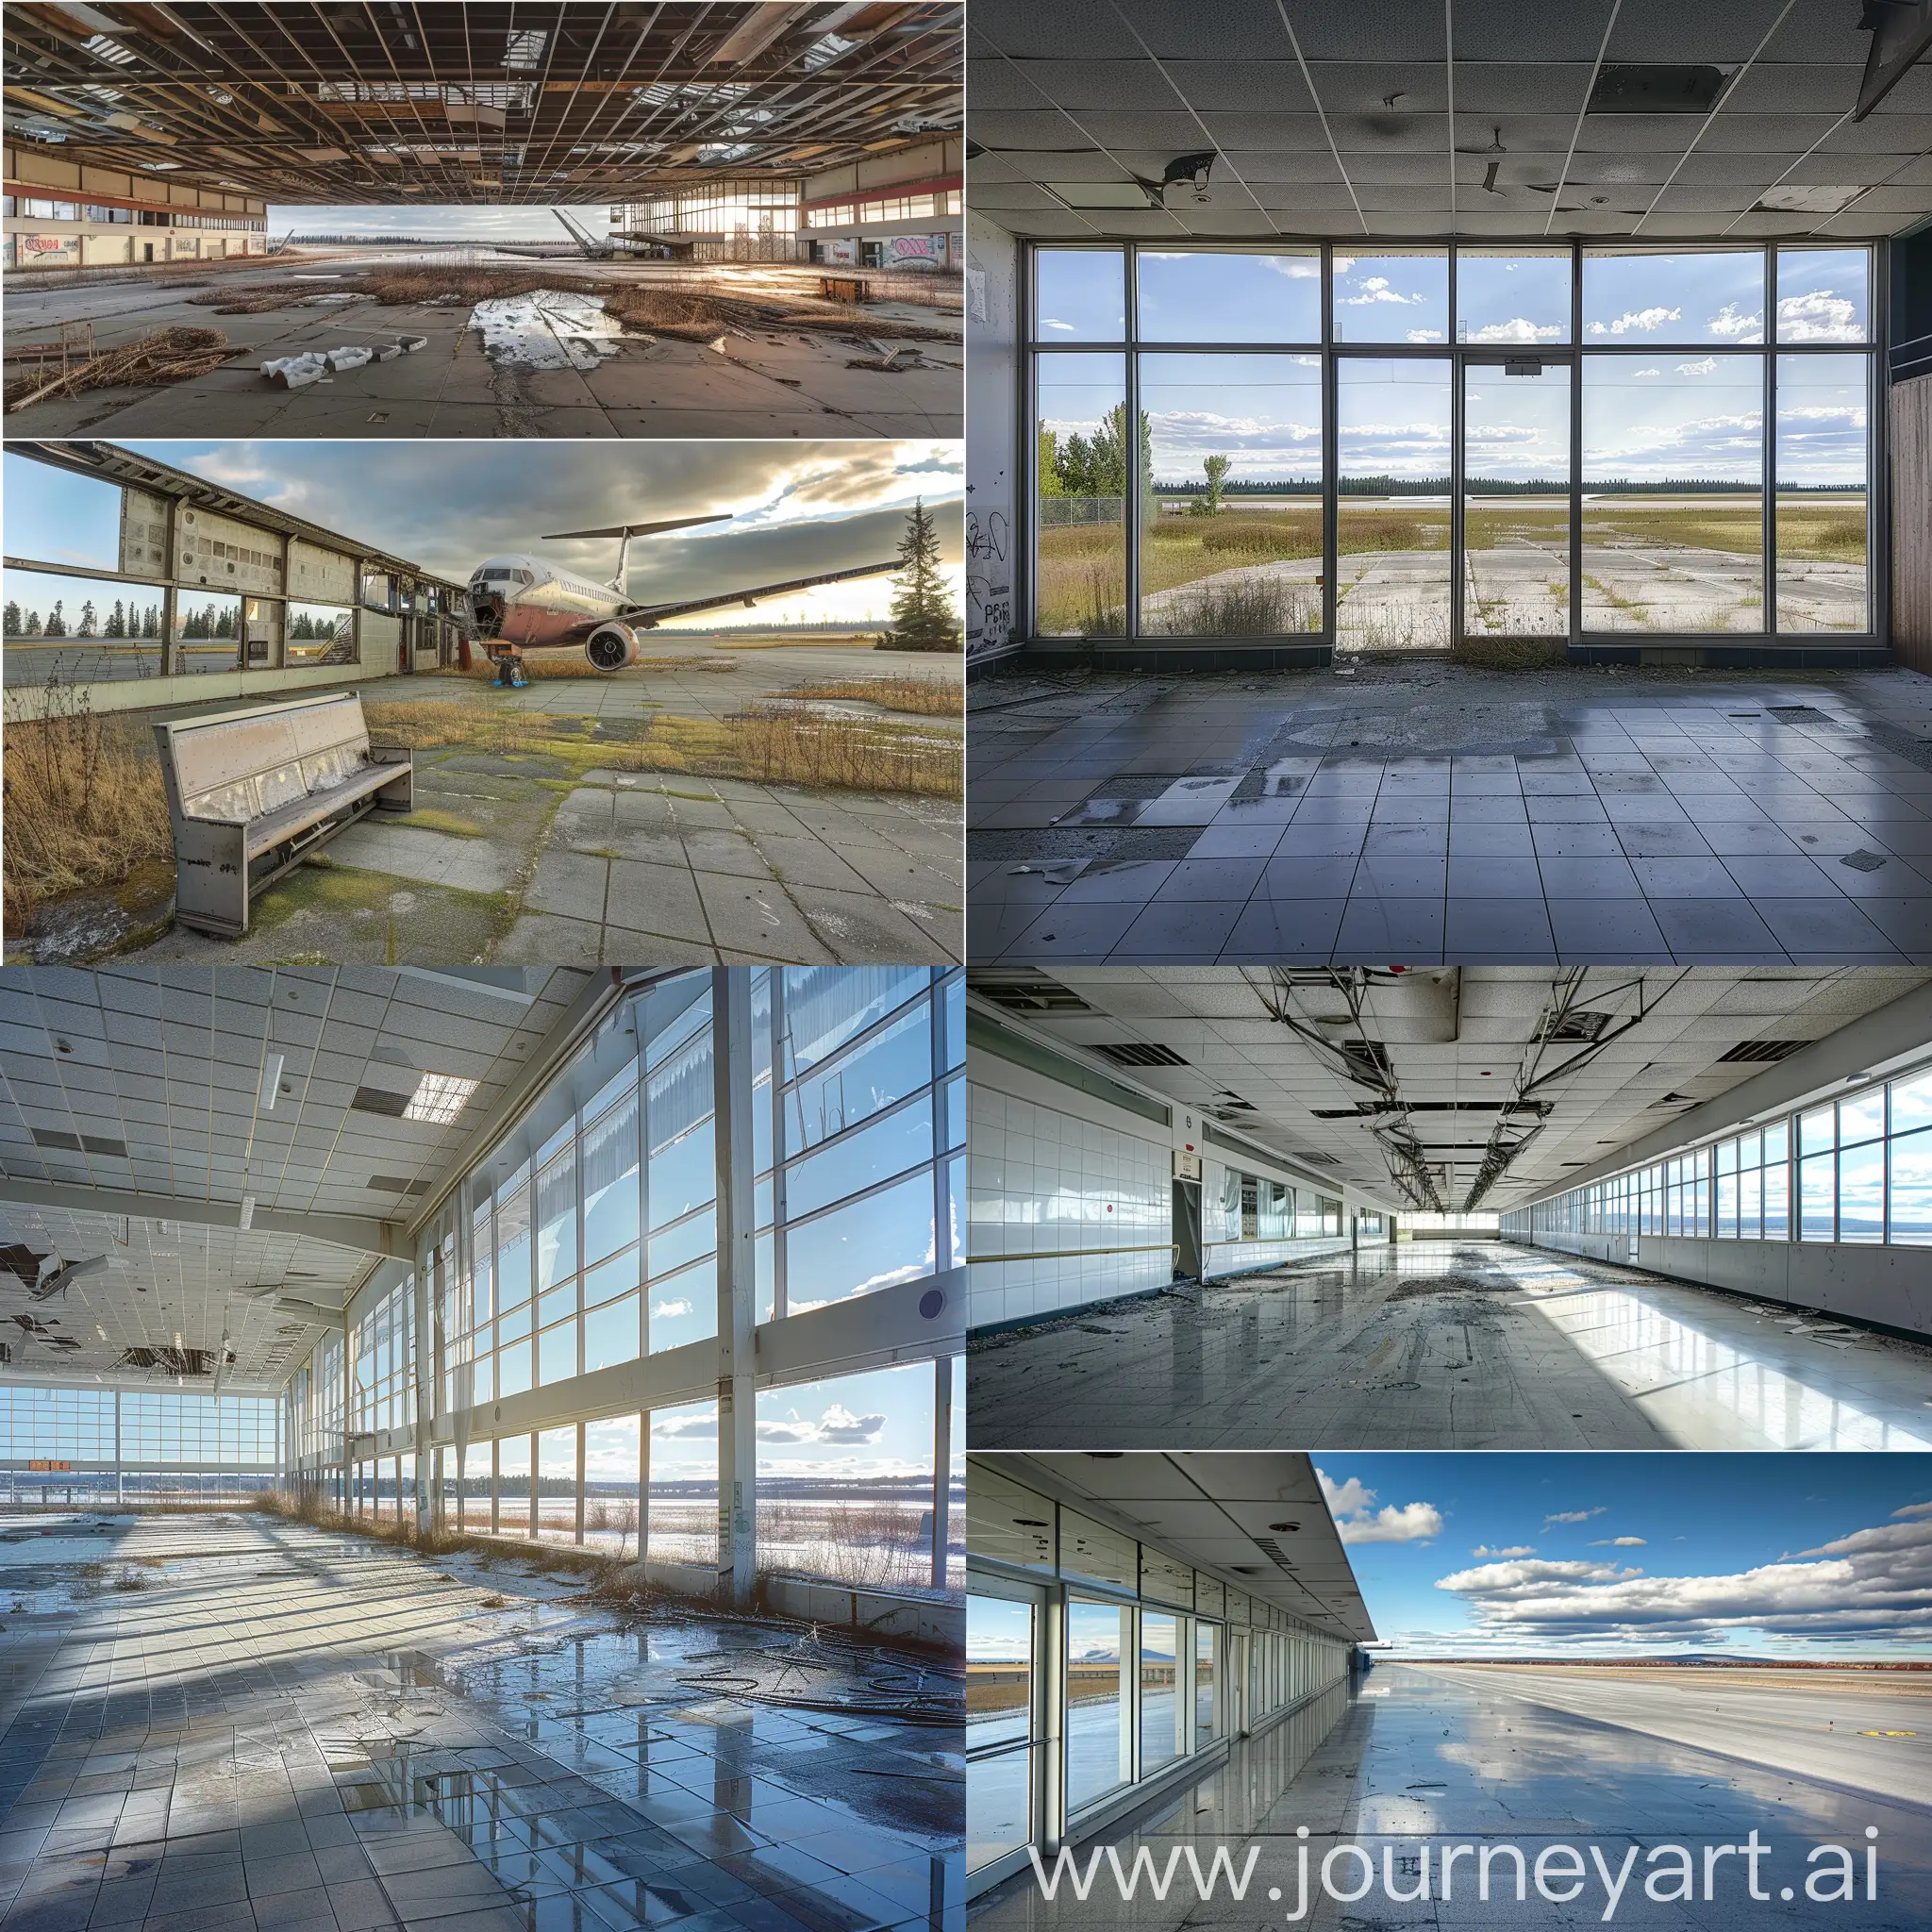 Abandoned-Airport-in-Canada-Exploring-Interior-and-Exterior-Views